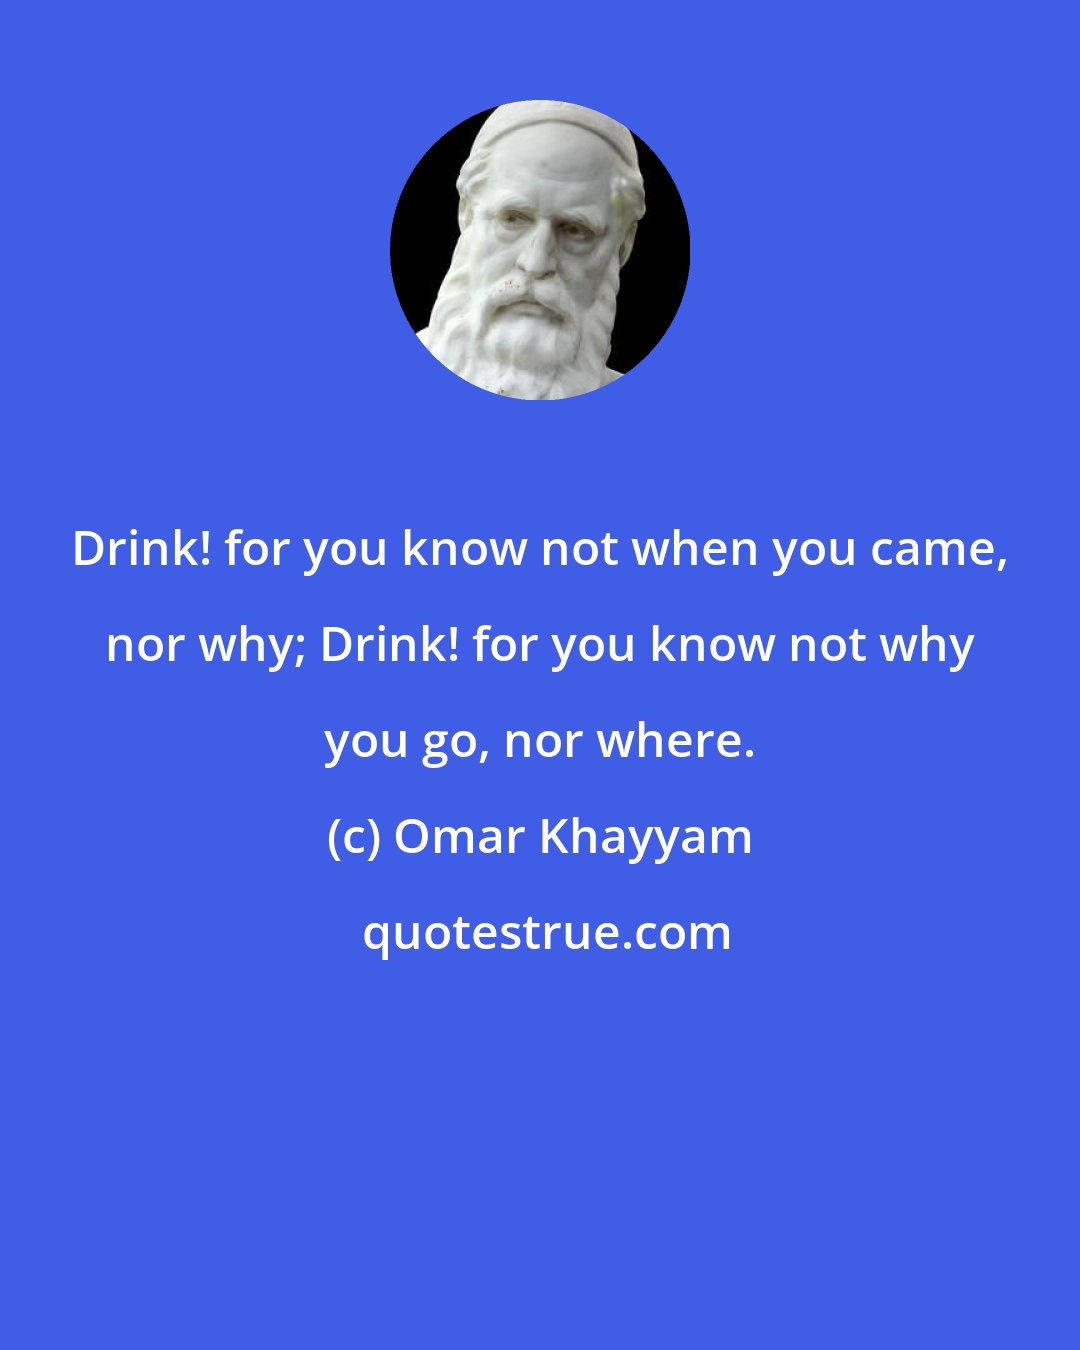 Omar Khayyam: Drink! for you know not when you came, nor why; Drink! for you know not why you go, nor where.